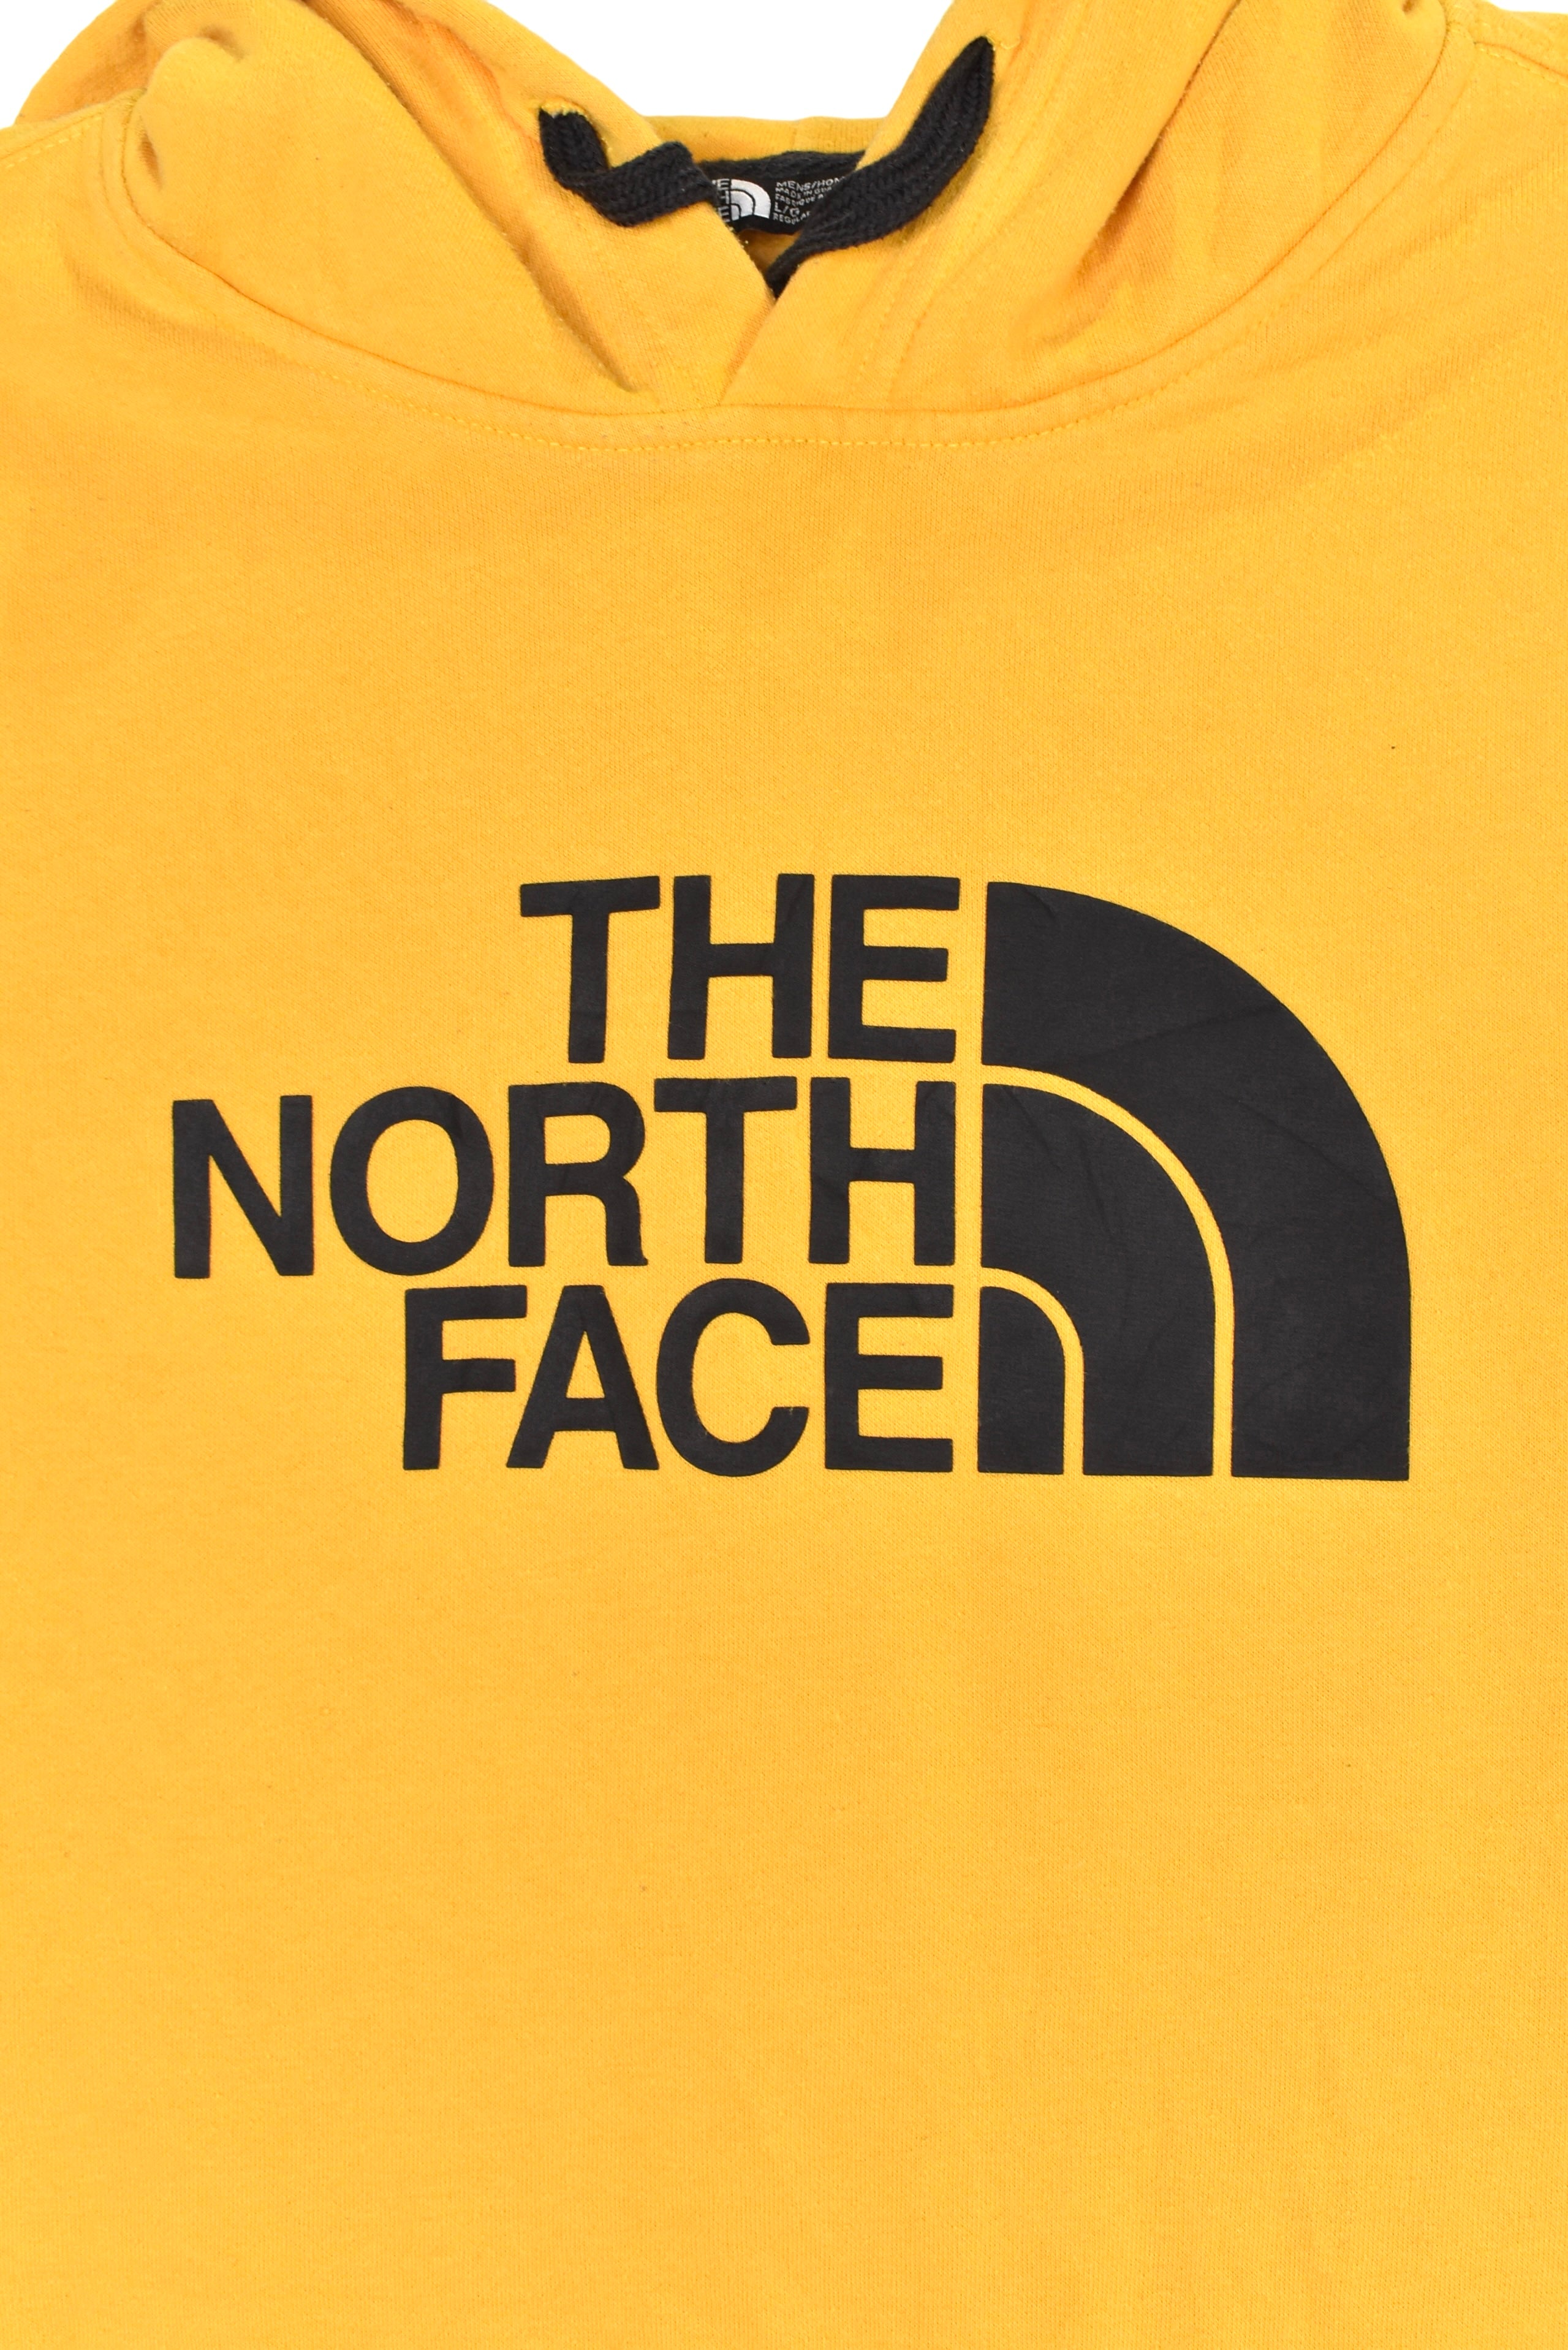 Vintage The North Face hoodie (L), yellow graphic sweatshirt